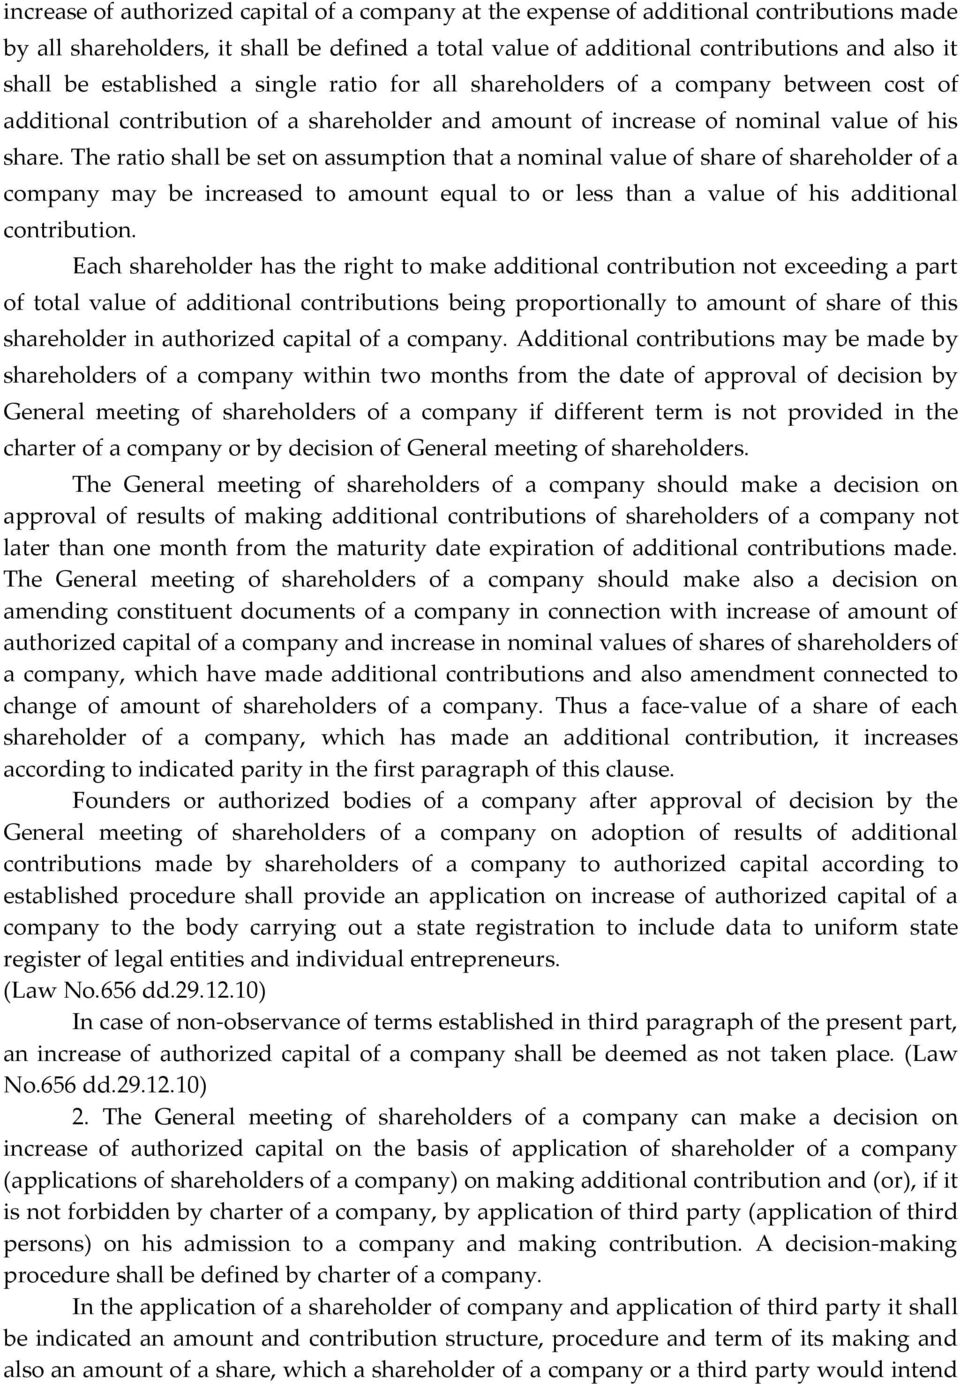 The ratio shall be set on assumption that a nominal value of share of shareholder of a company may be increased to amount equal to or less than a value of his additional contribution.